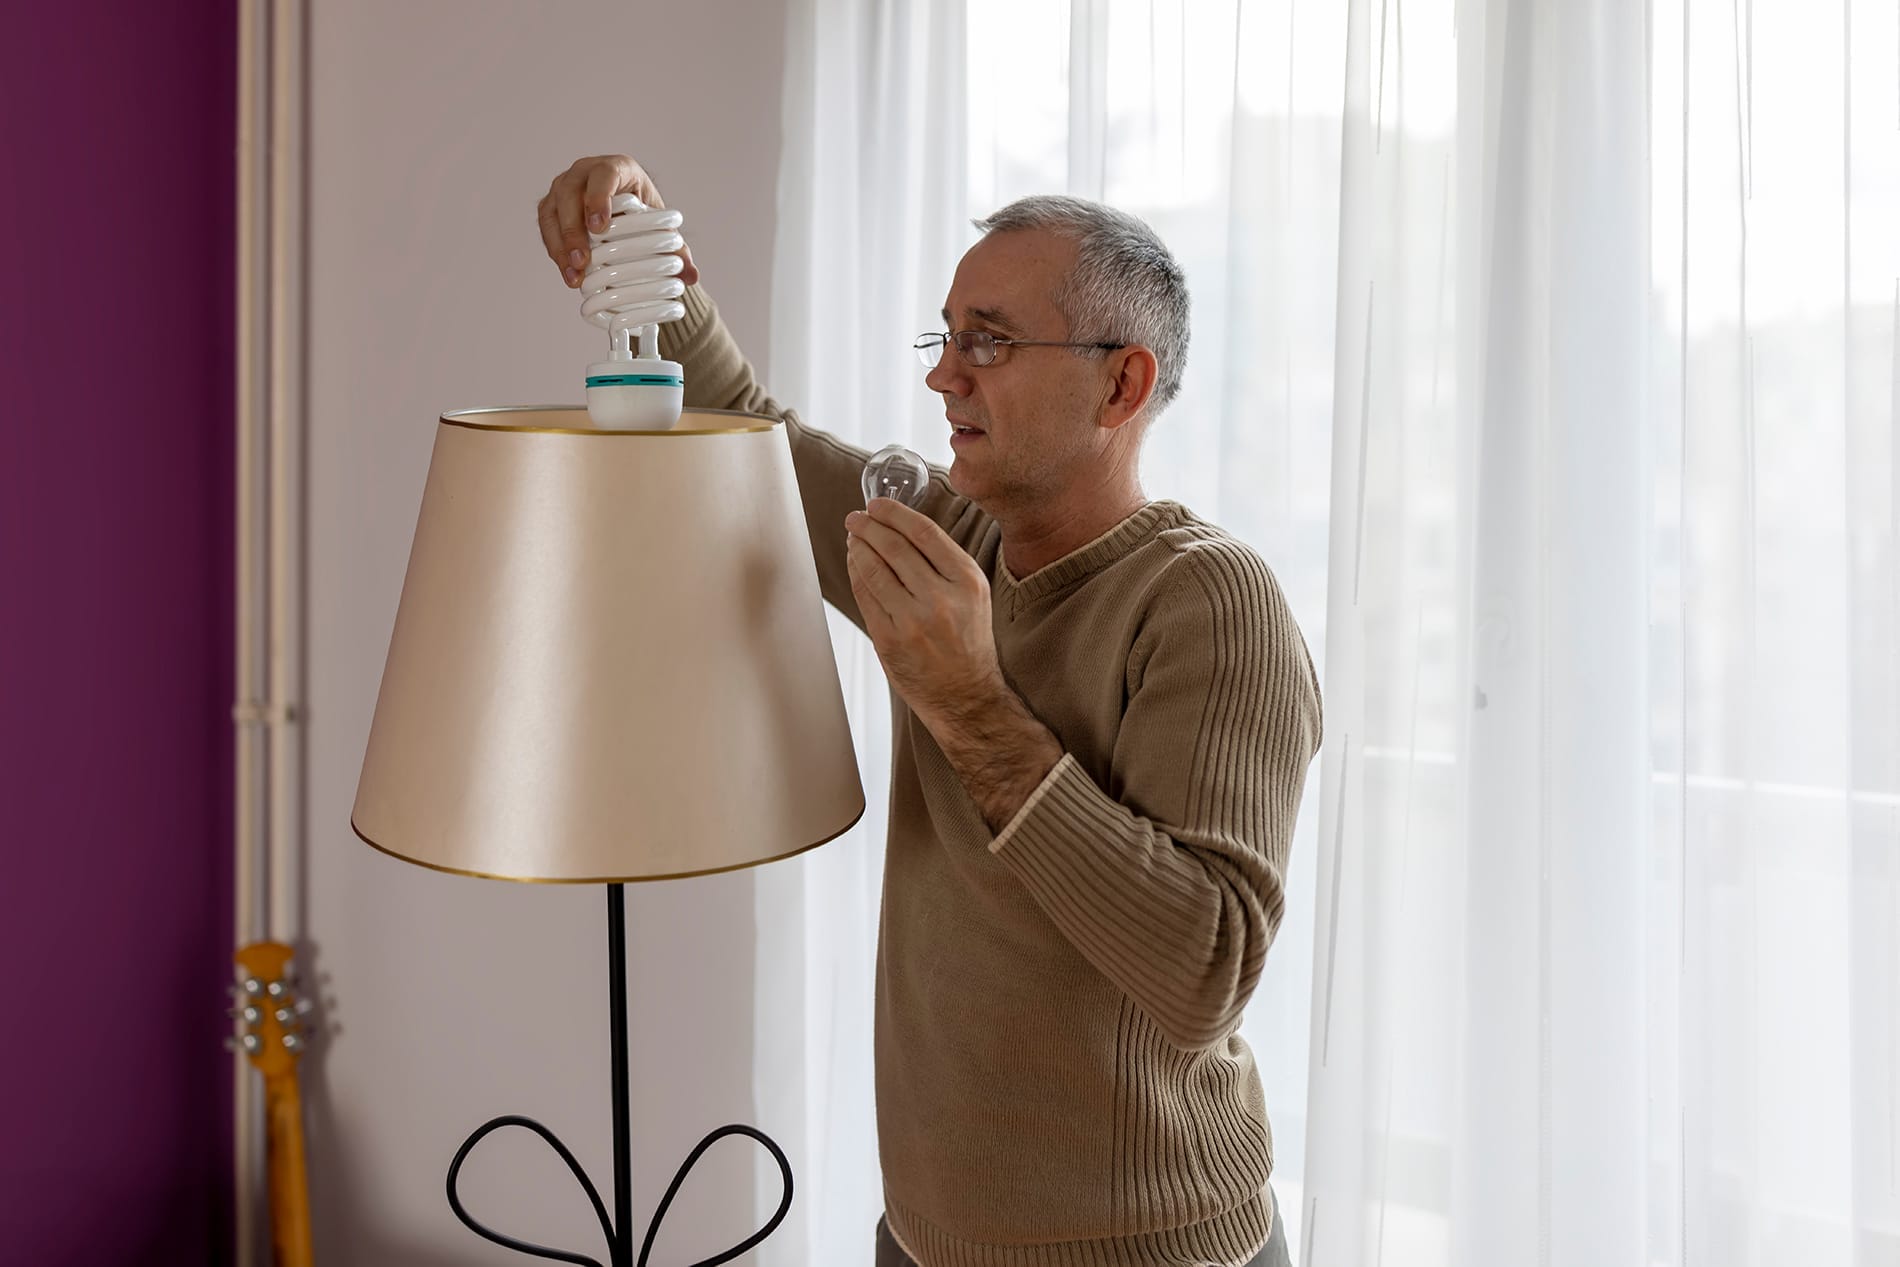 Energy Conservation in Daily Habits Man Changes Lightbulb